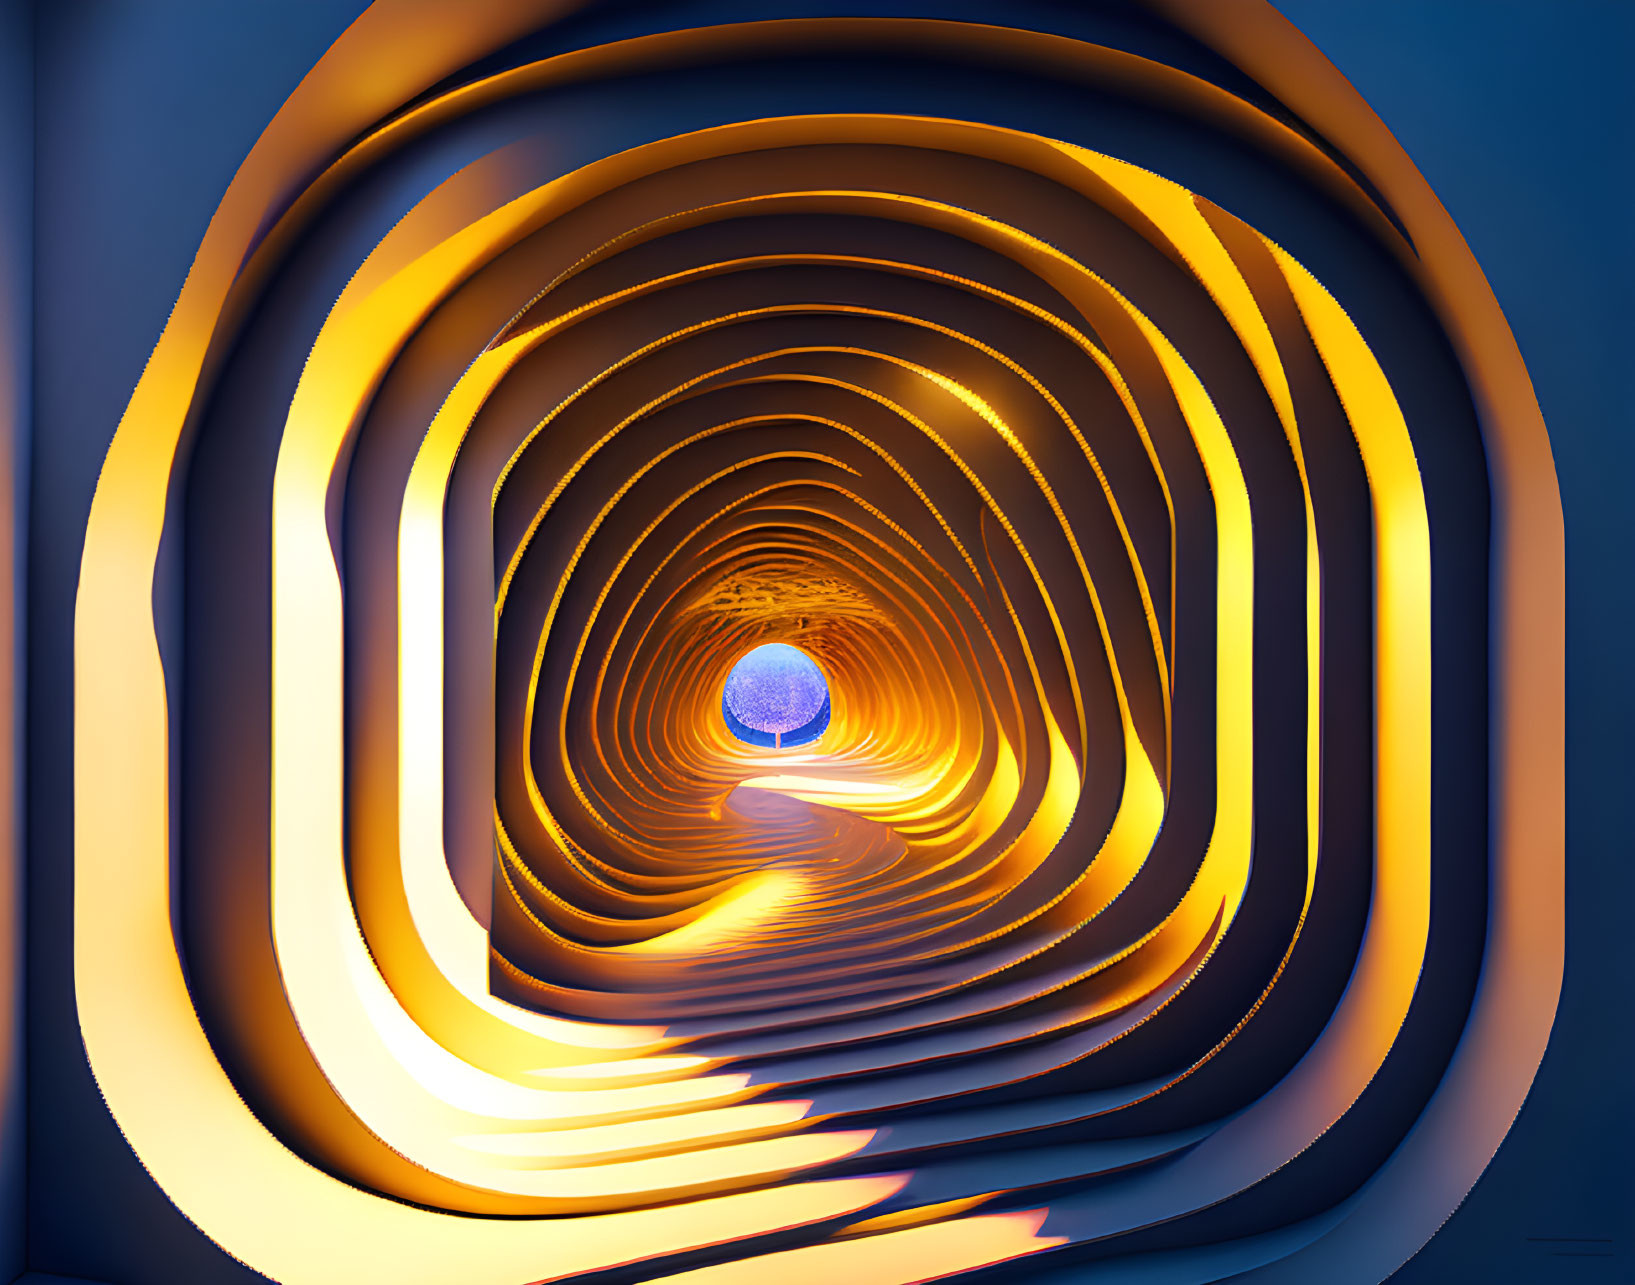 Abstract Image: Tunnel of Illuminated Arches Leading to Bright Sphere